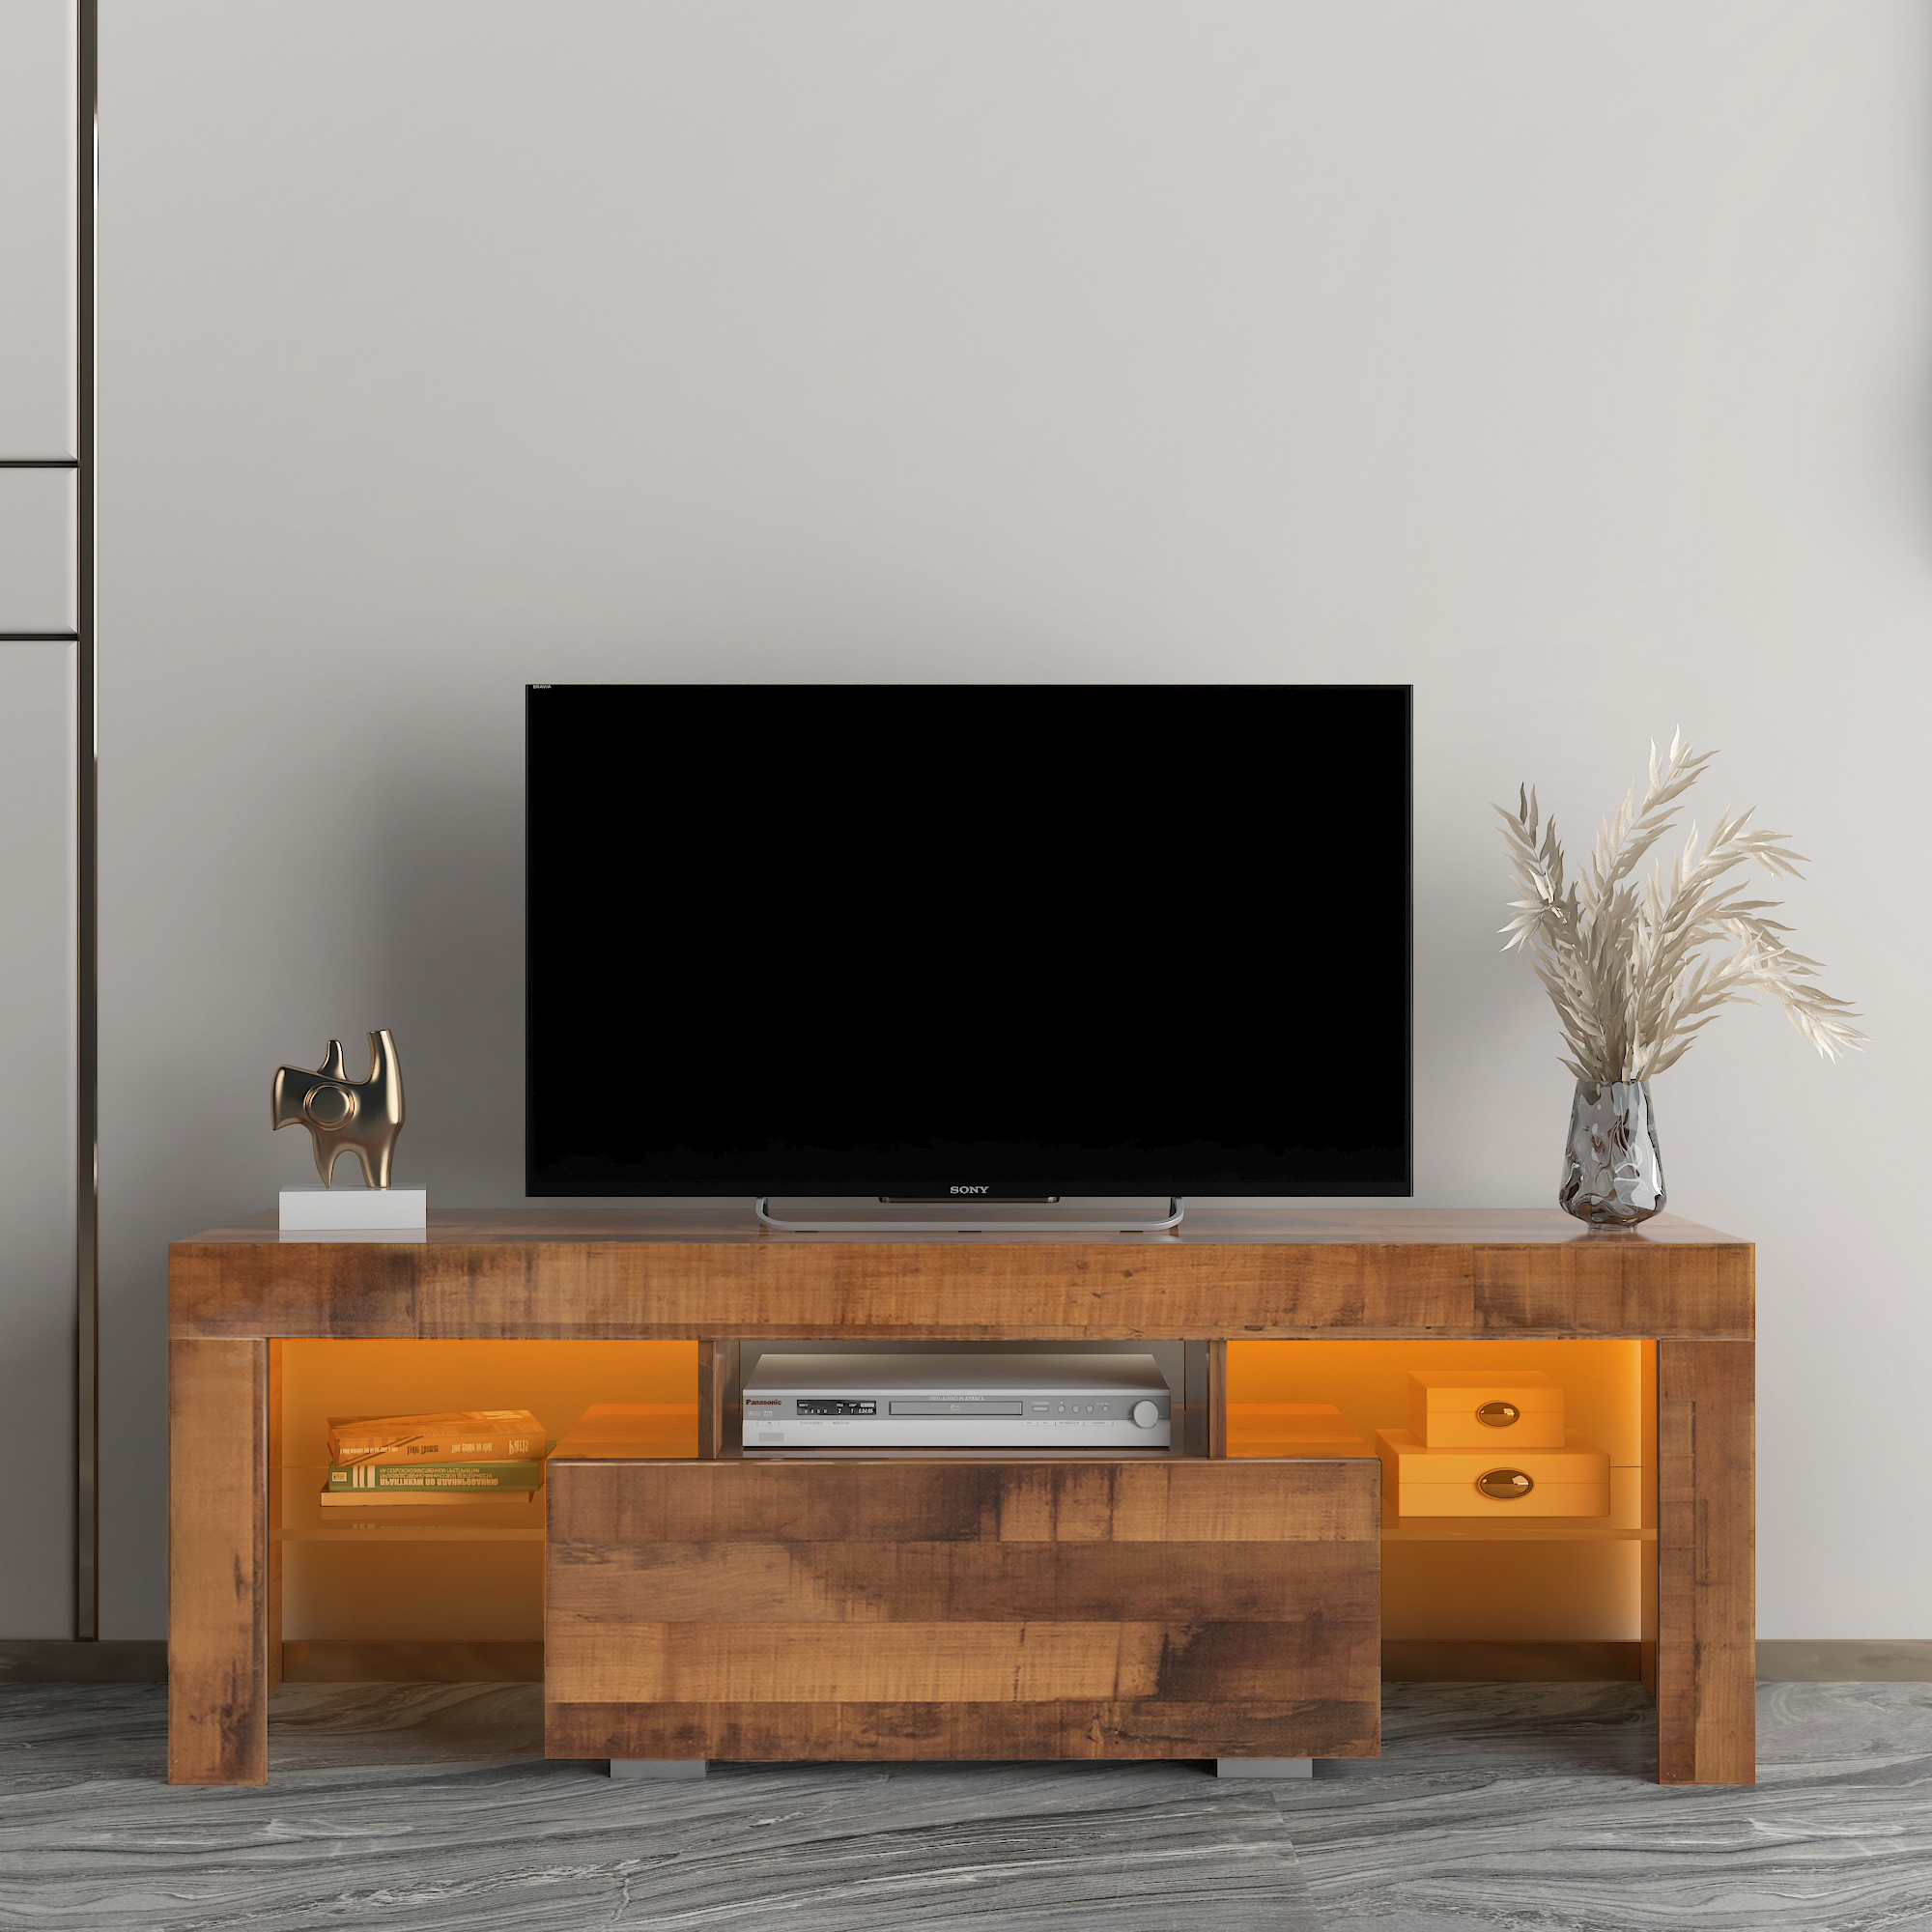 TV Stand with LED RGB Lights,Flat Screen TV Cabinet, Gaming Consoles - in Lounge Room, Living Room and Bedroom,WALNUT-CASAINC